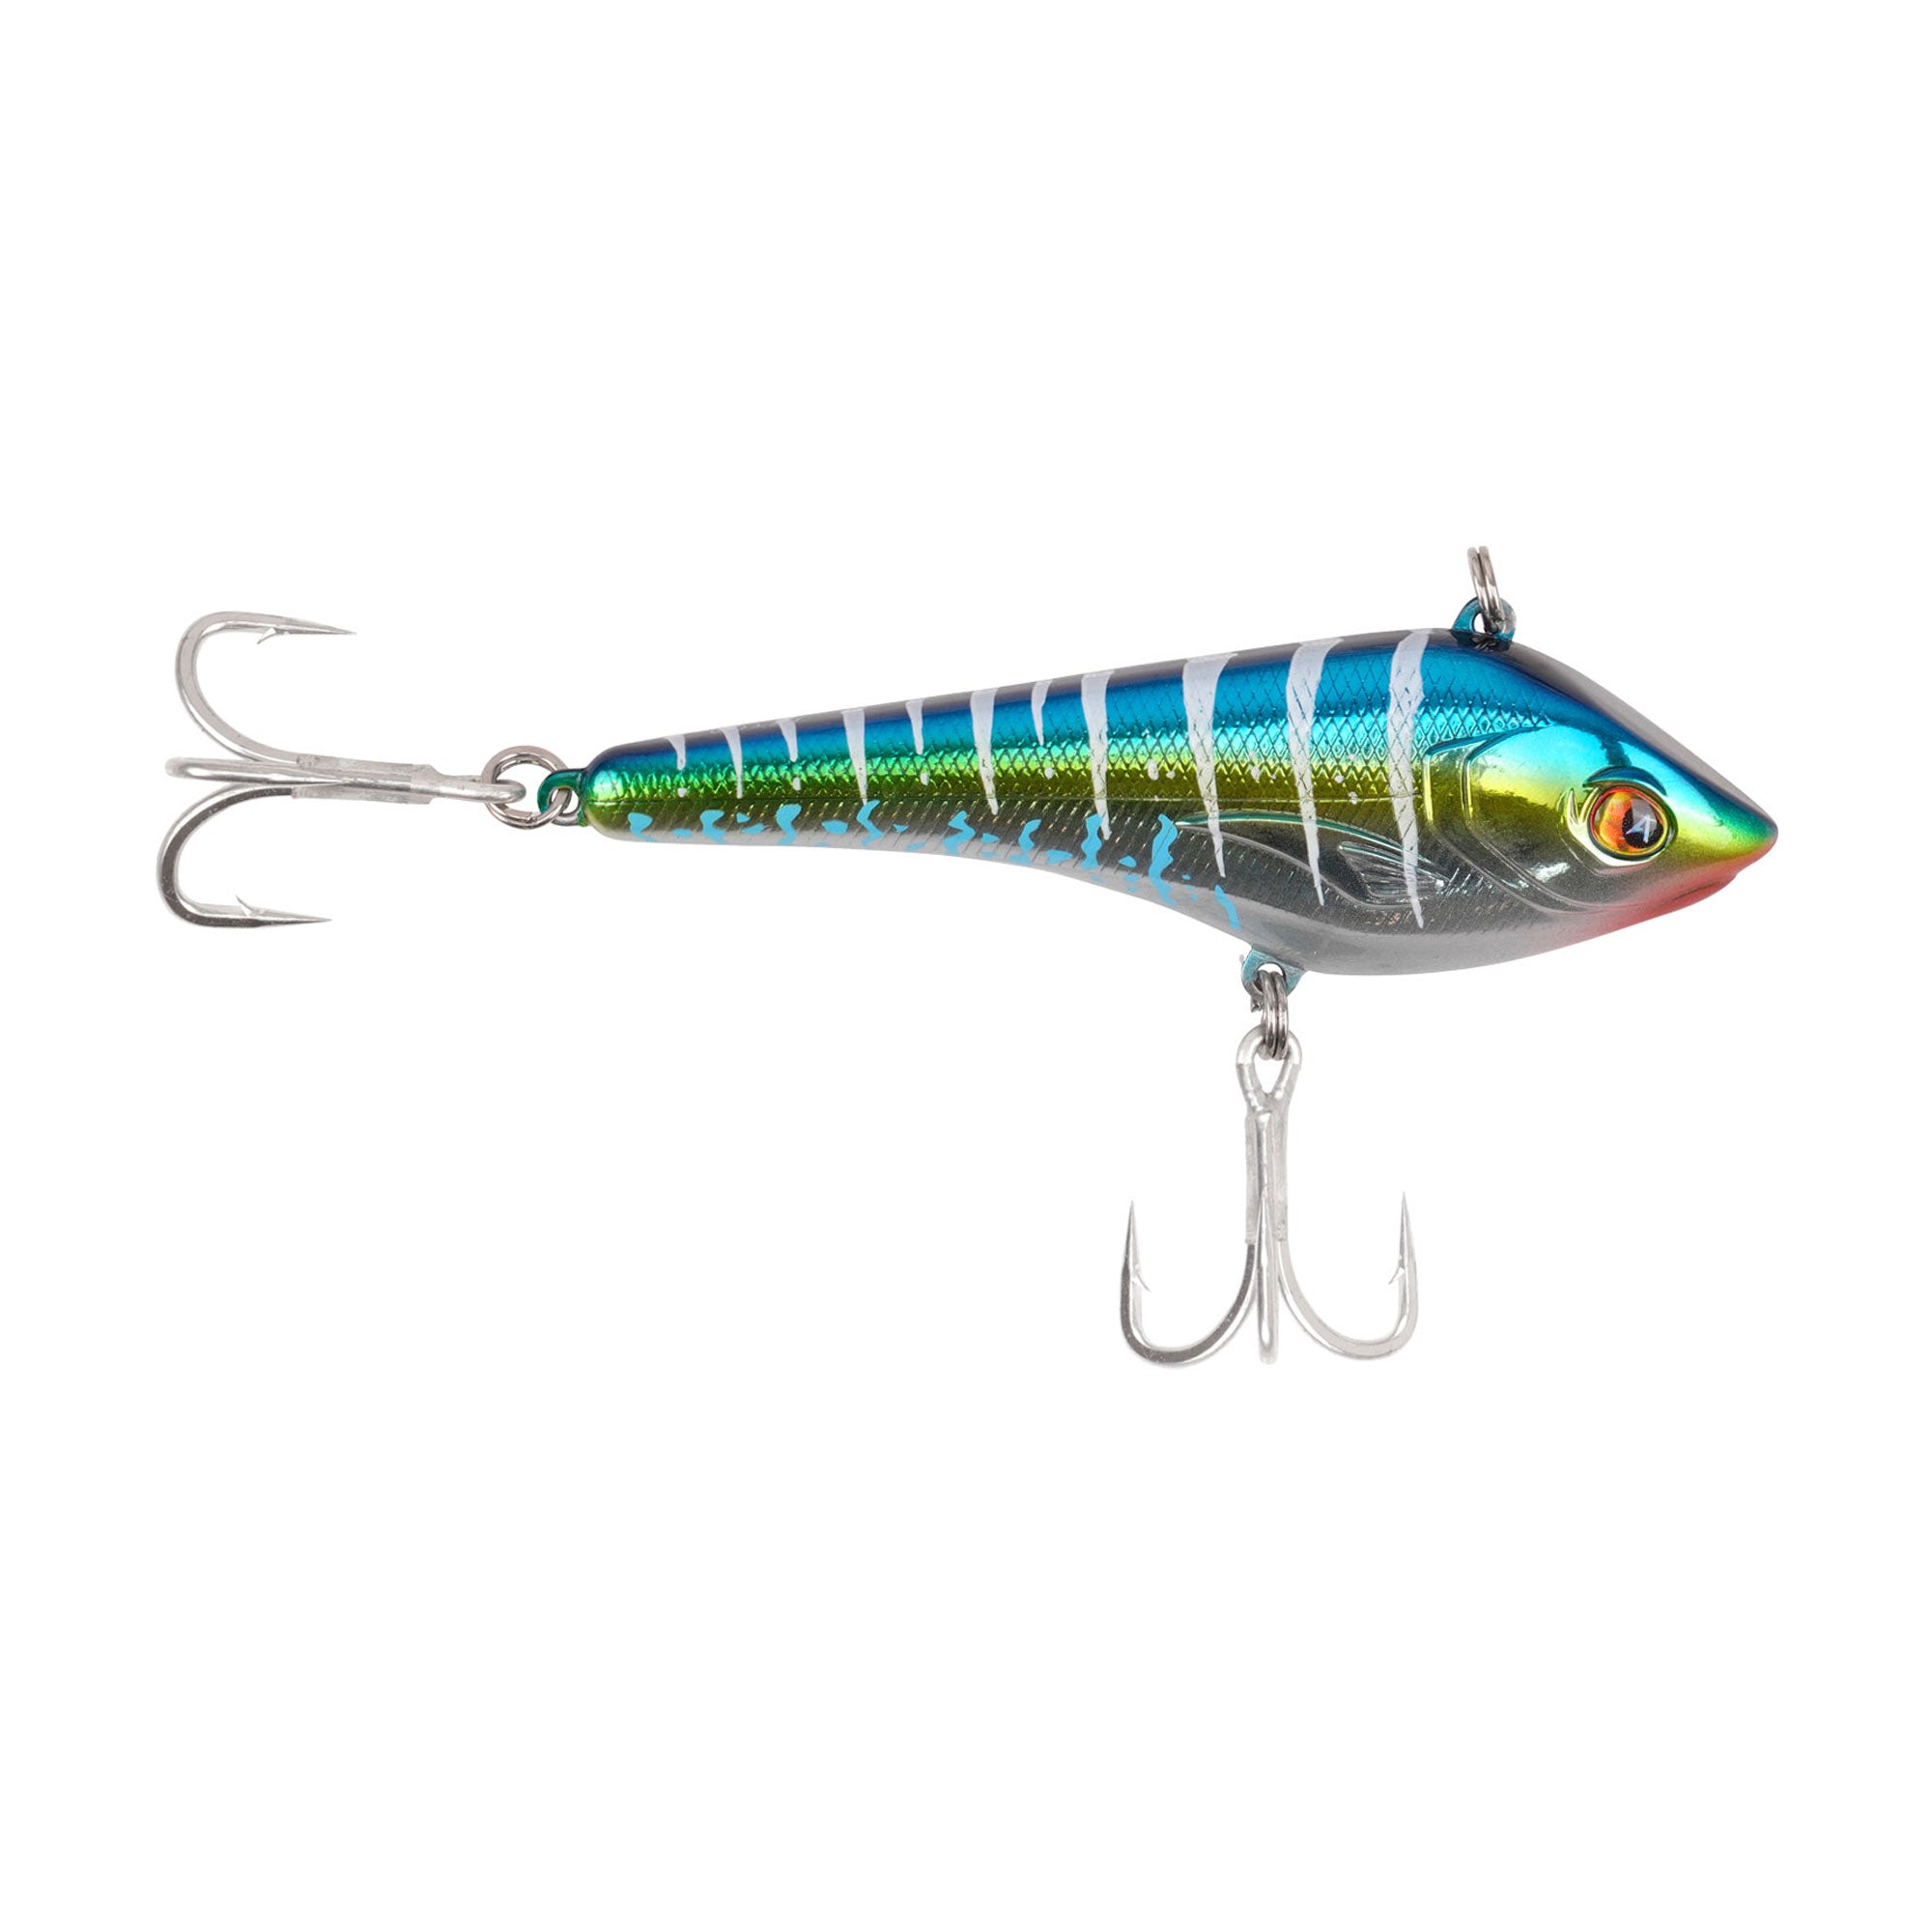 AFTCO Blue Fever Digger Lure / Yellowfin / 112g, 140mm